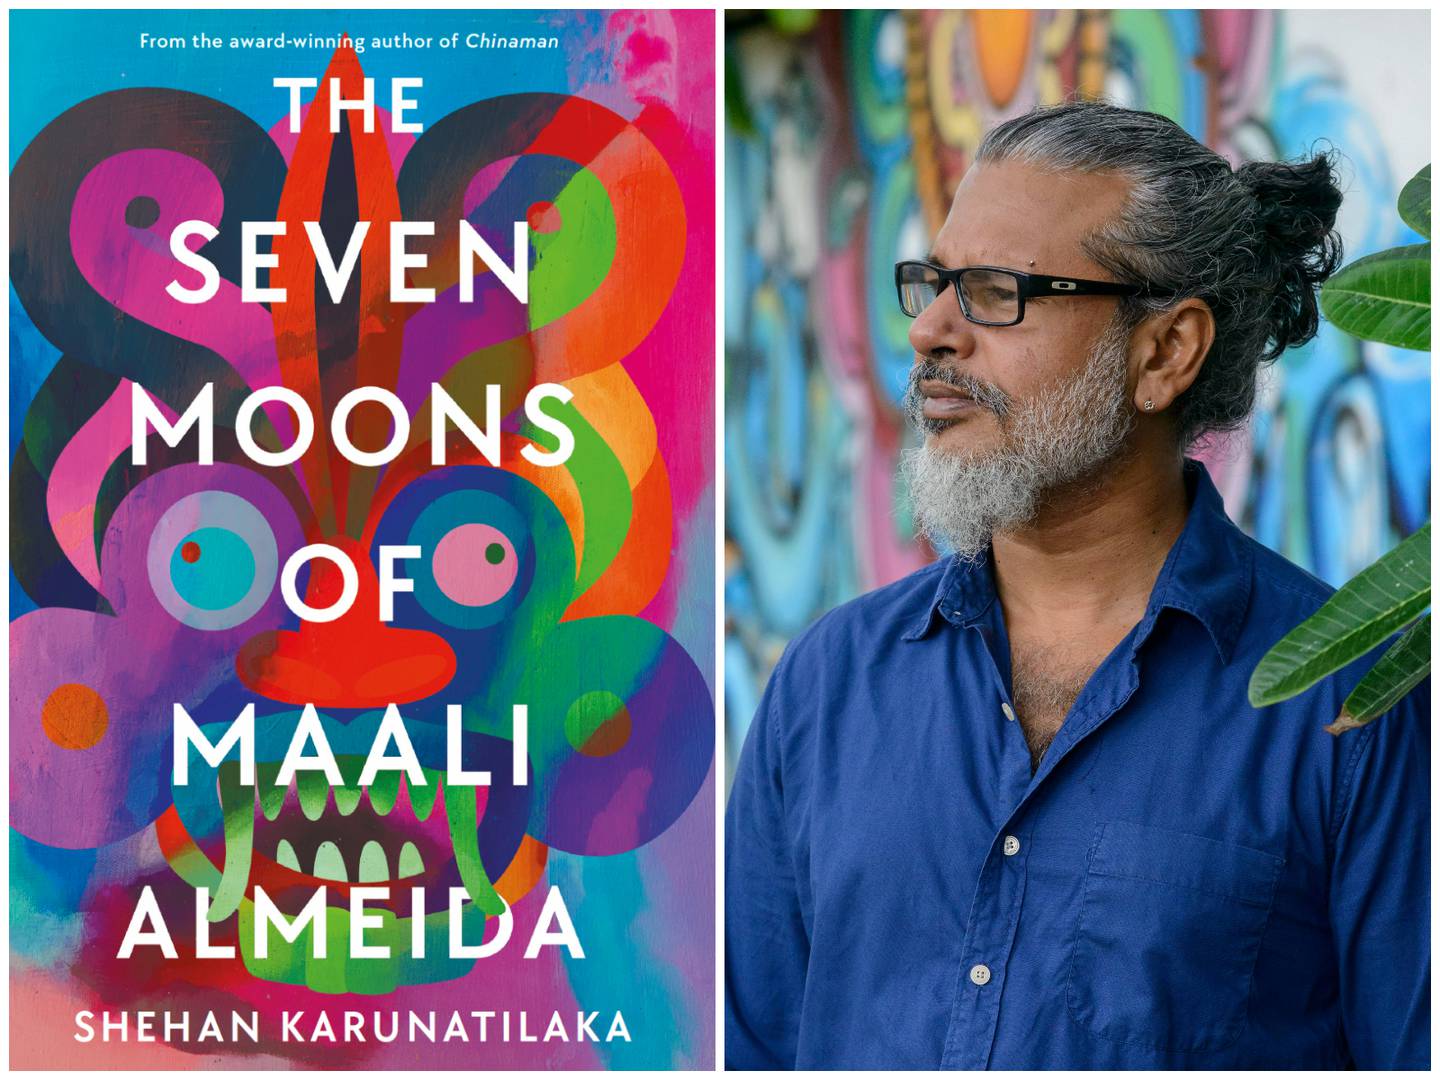 ‘The Seven Moons of Maali Almeida’ is an epic, otherworldly satire set in Colombo, Sri Lanka, during the 1990 civil war. Photo: Booker Prize